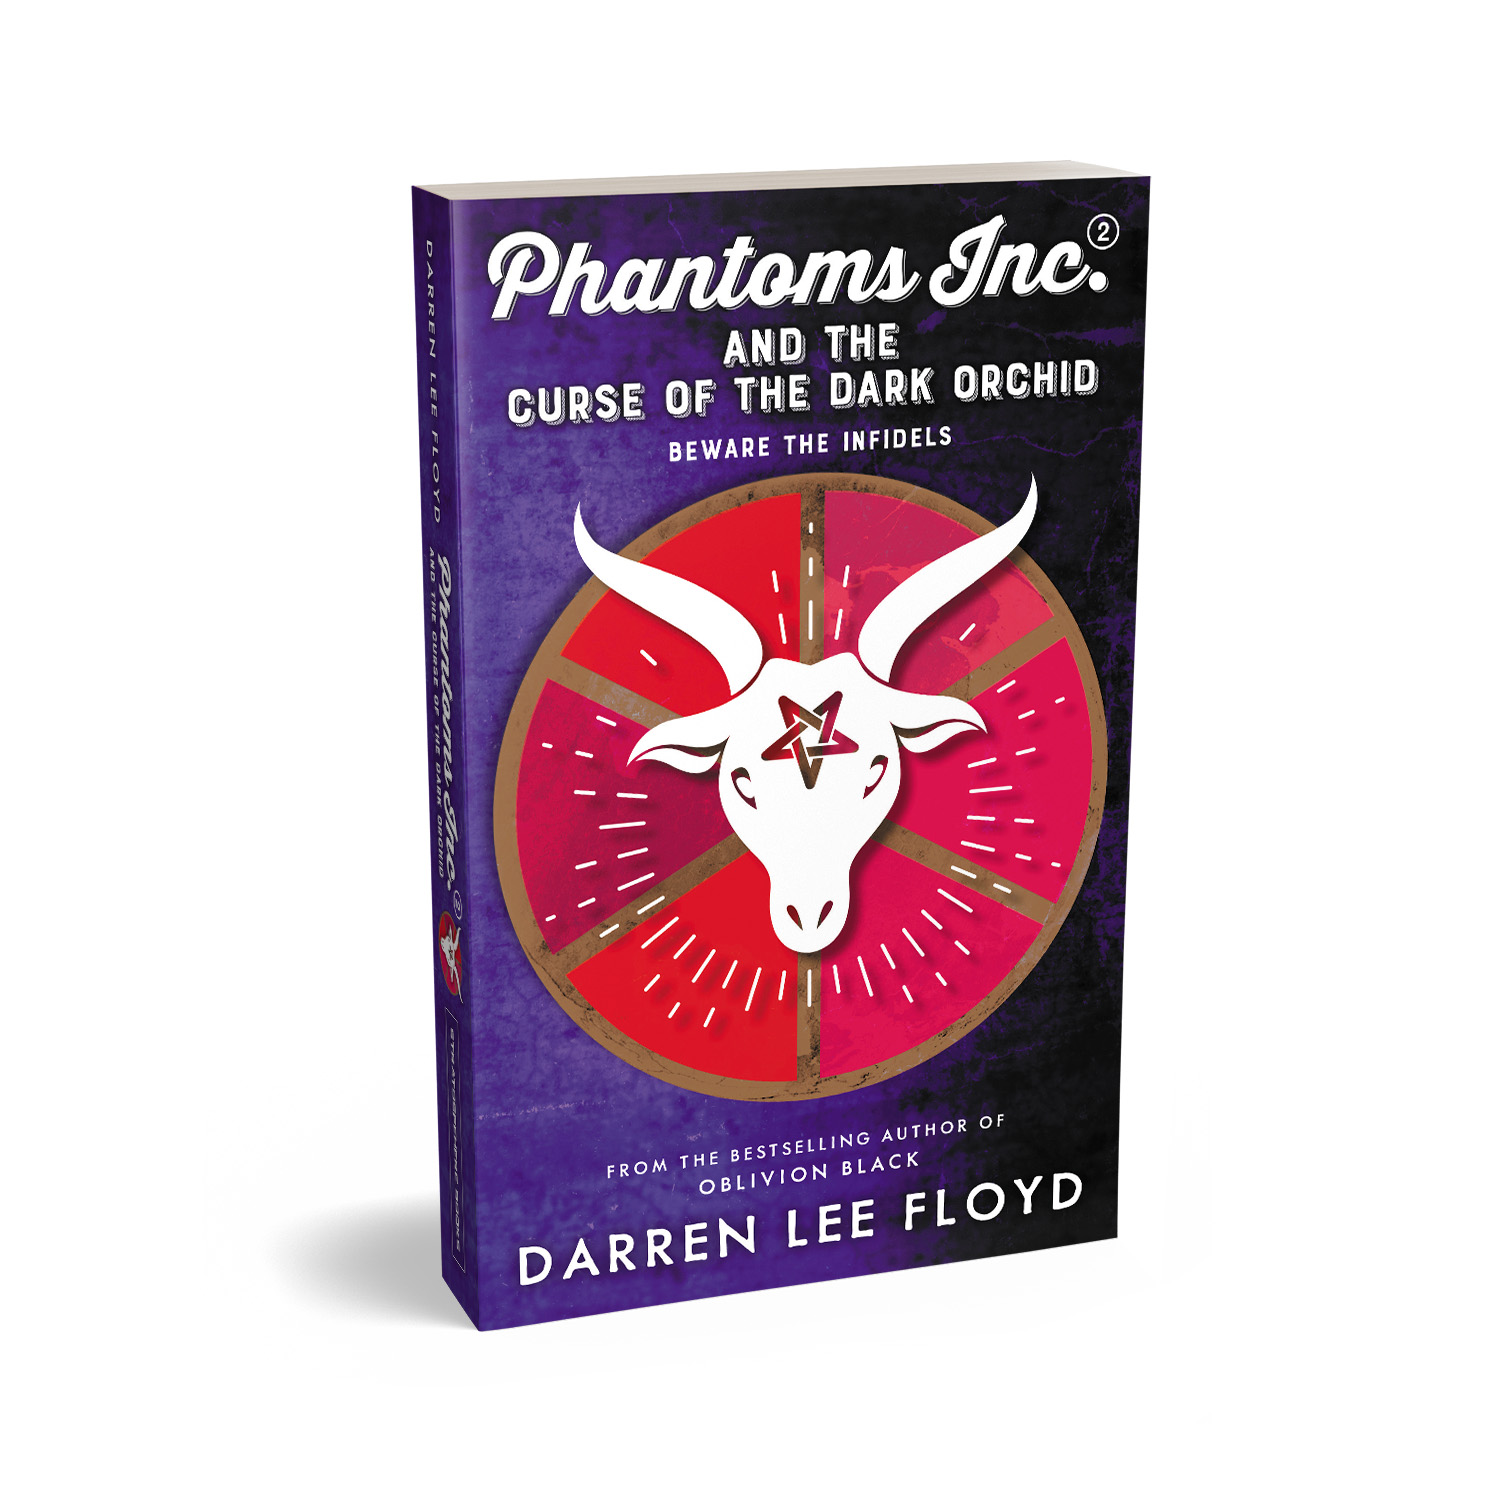 The 'Phantoms Inc.' series is a fun scifi / supernatural hybrid. The author is Darren Lee Floyd. The cover and interior design of the books are by Mark Thomas. To learn more about what Mark could do for your book, please visit coverness.com.